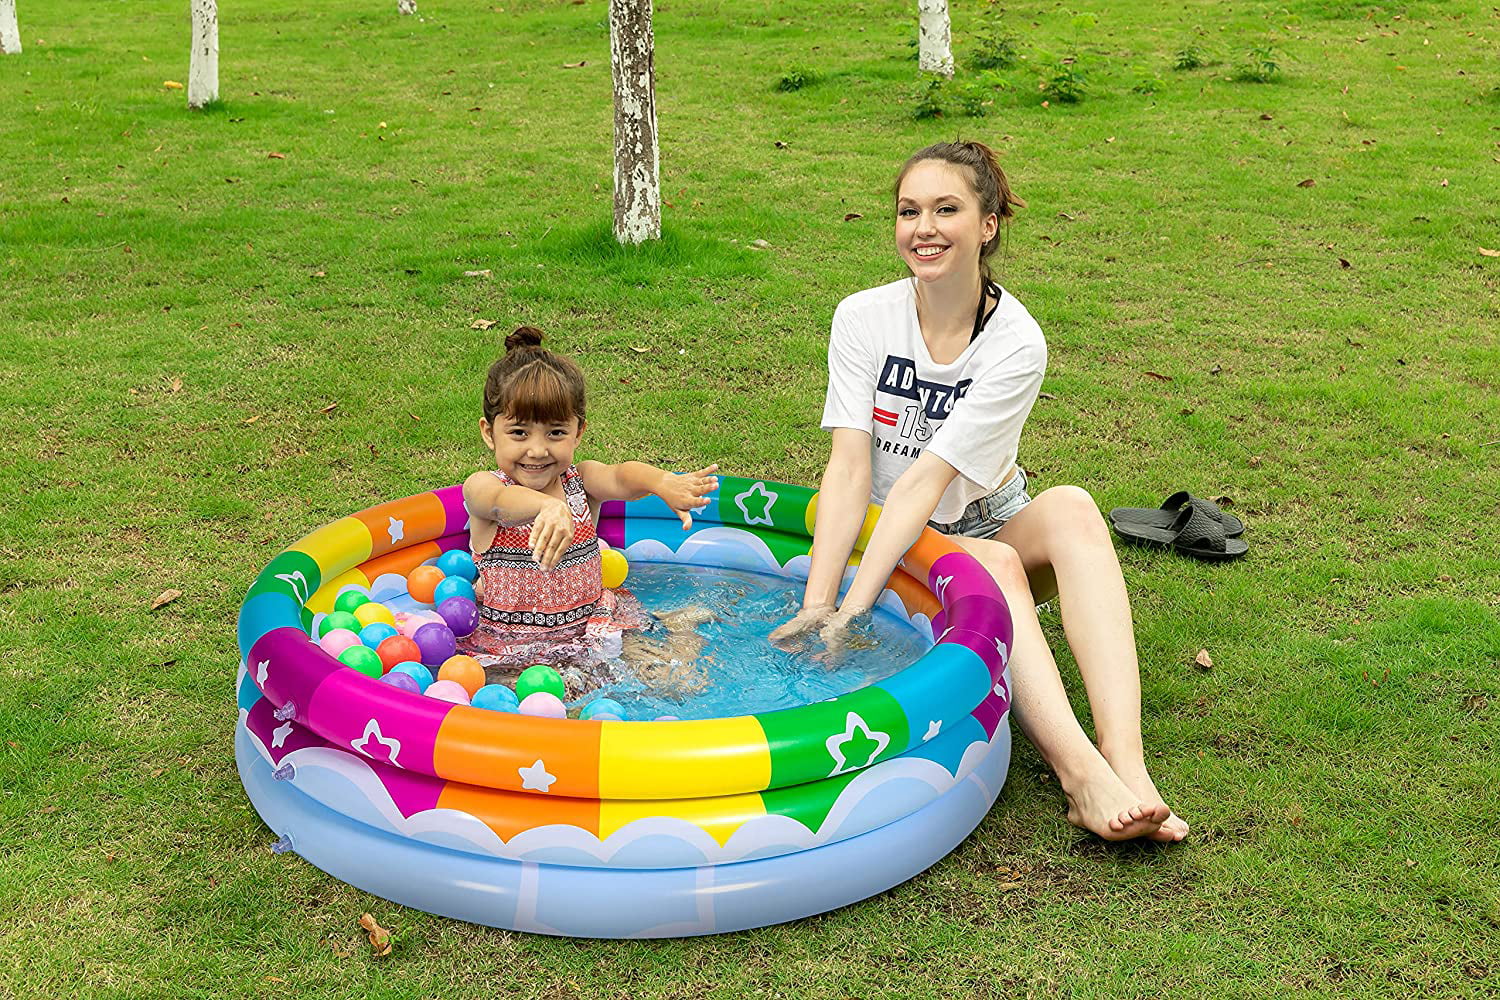 Inflatable Baby Swimming Pool 6 Color Rings Kiddie Pool Blow Up Pool Pit Ball Pool Water Pool for Kids Toddler Indoor Outdoor Summer Fun 1 Pack 58'' Multicolor 